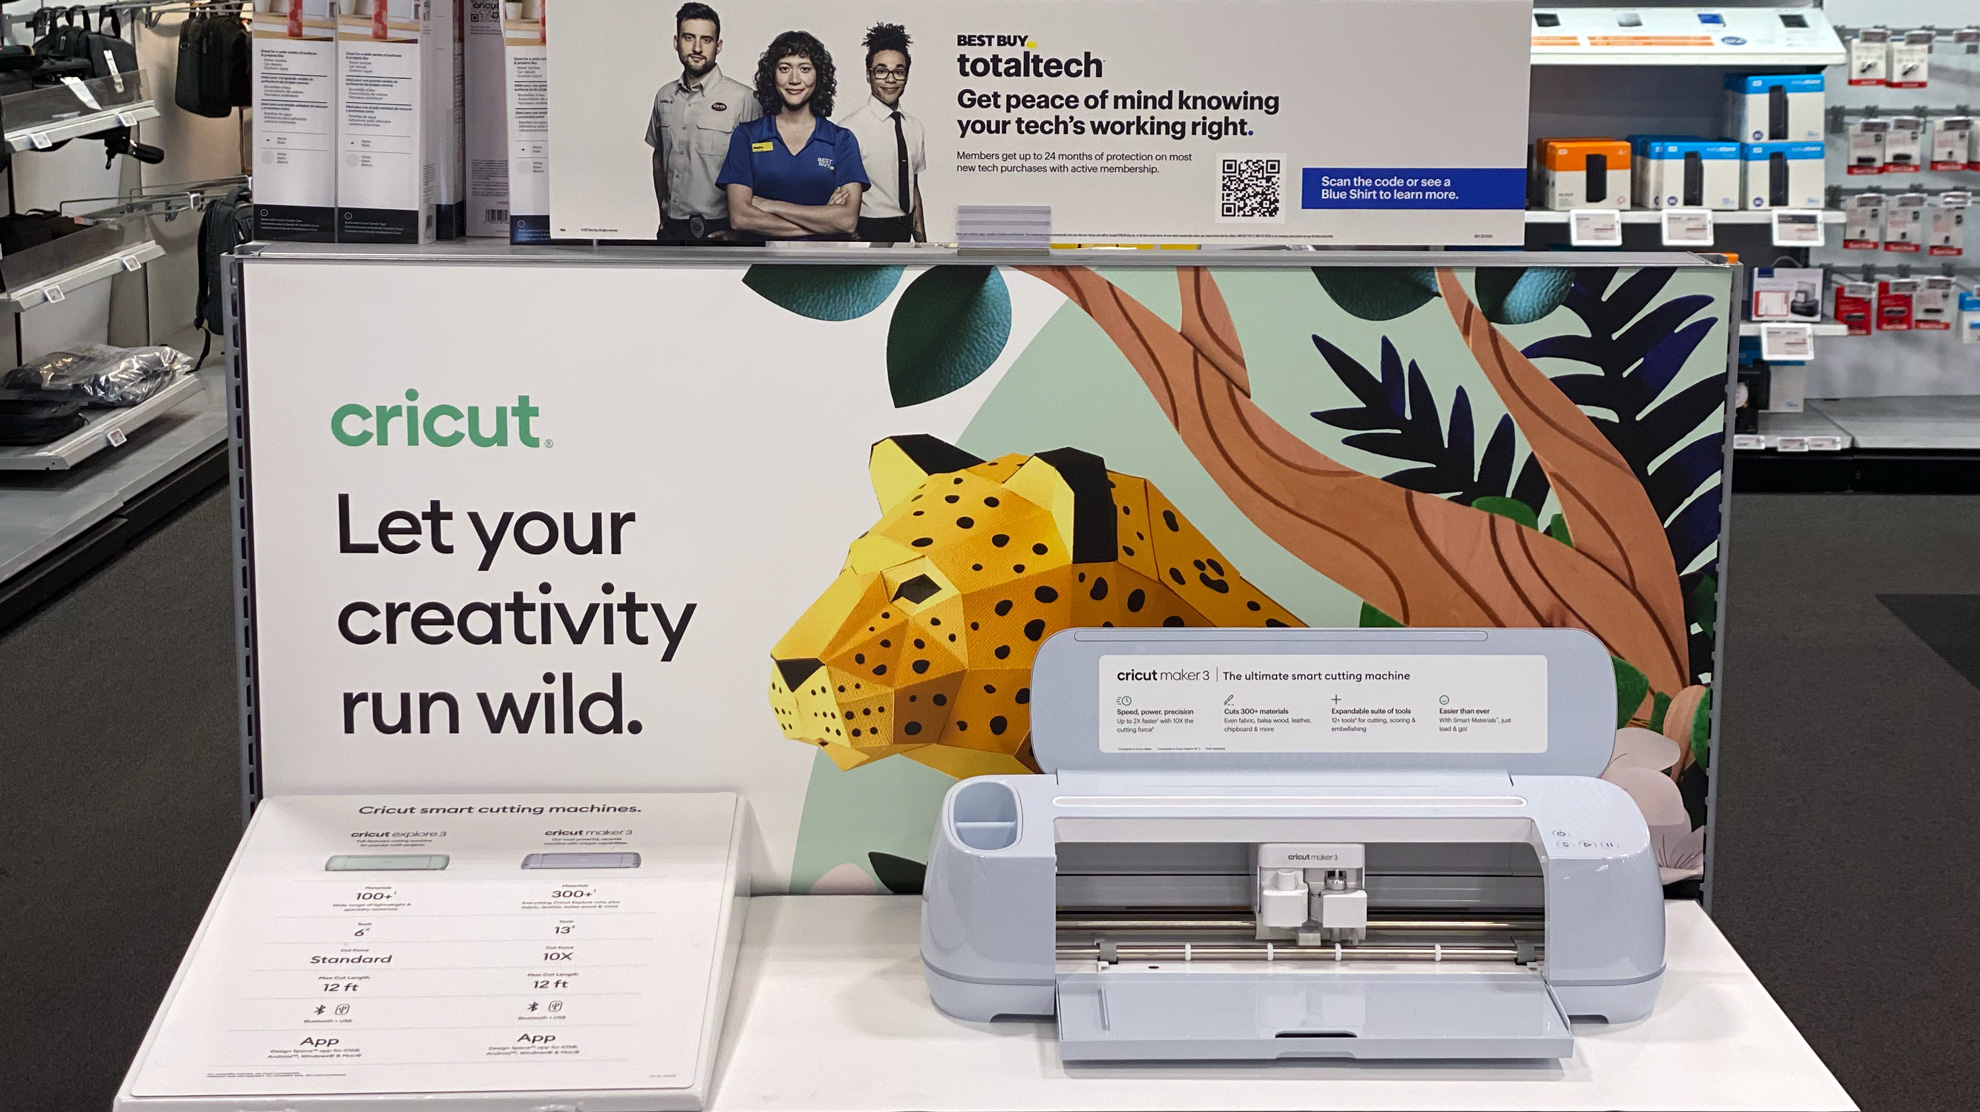 Cricut at Best Buy puts creative technology in more hands